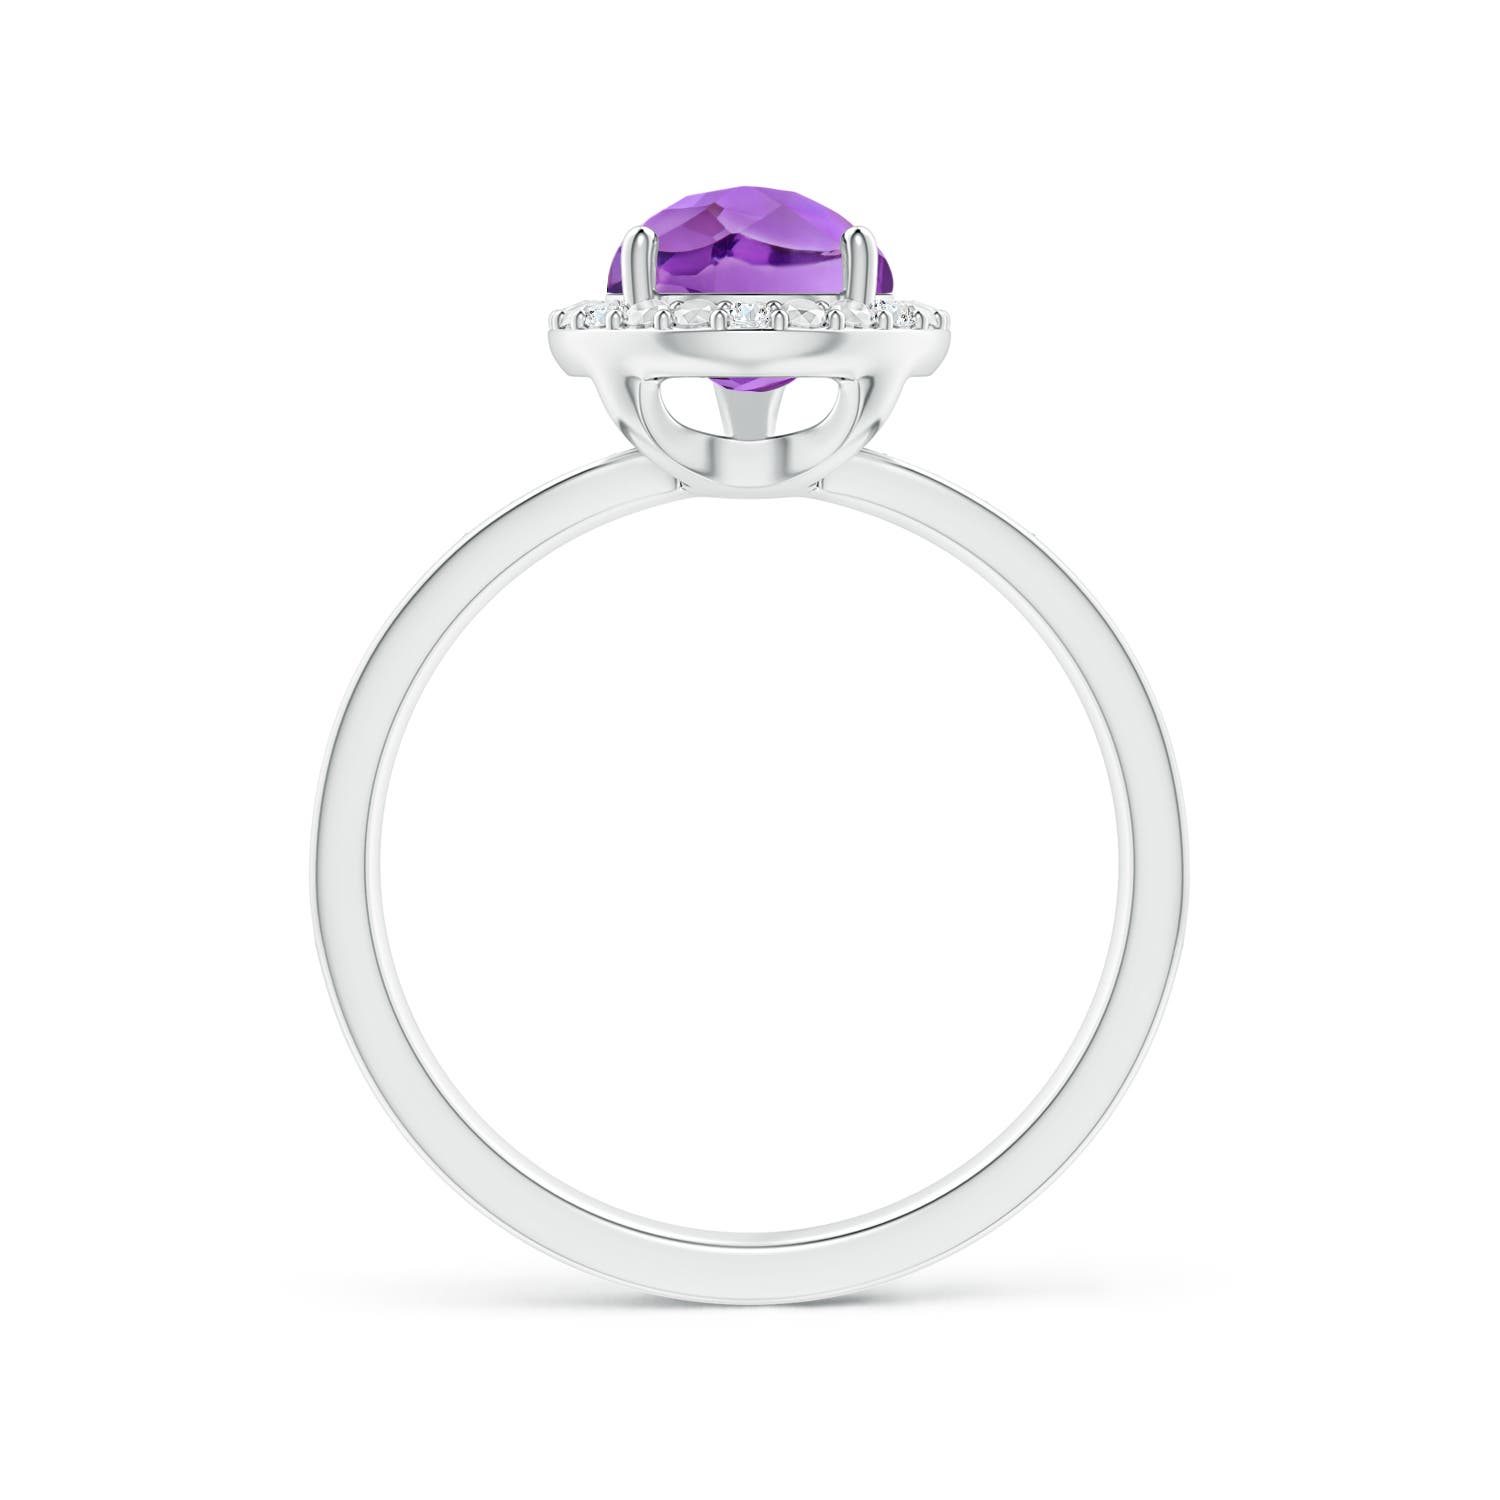 AA - Amethyst / 1.68 CT / 14 KT White Gold